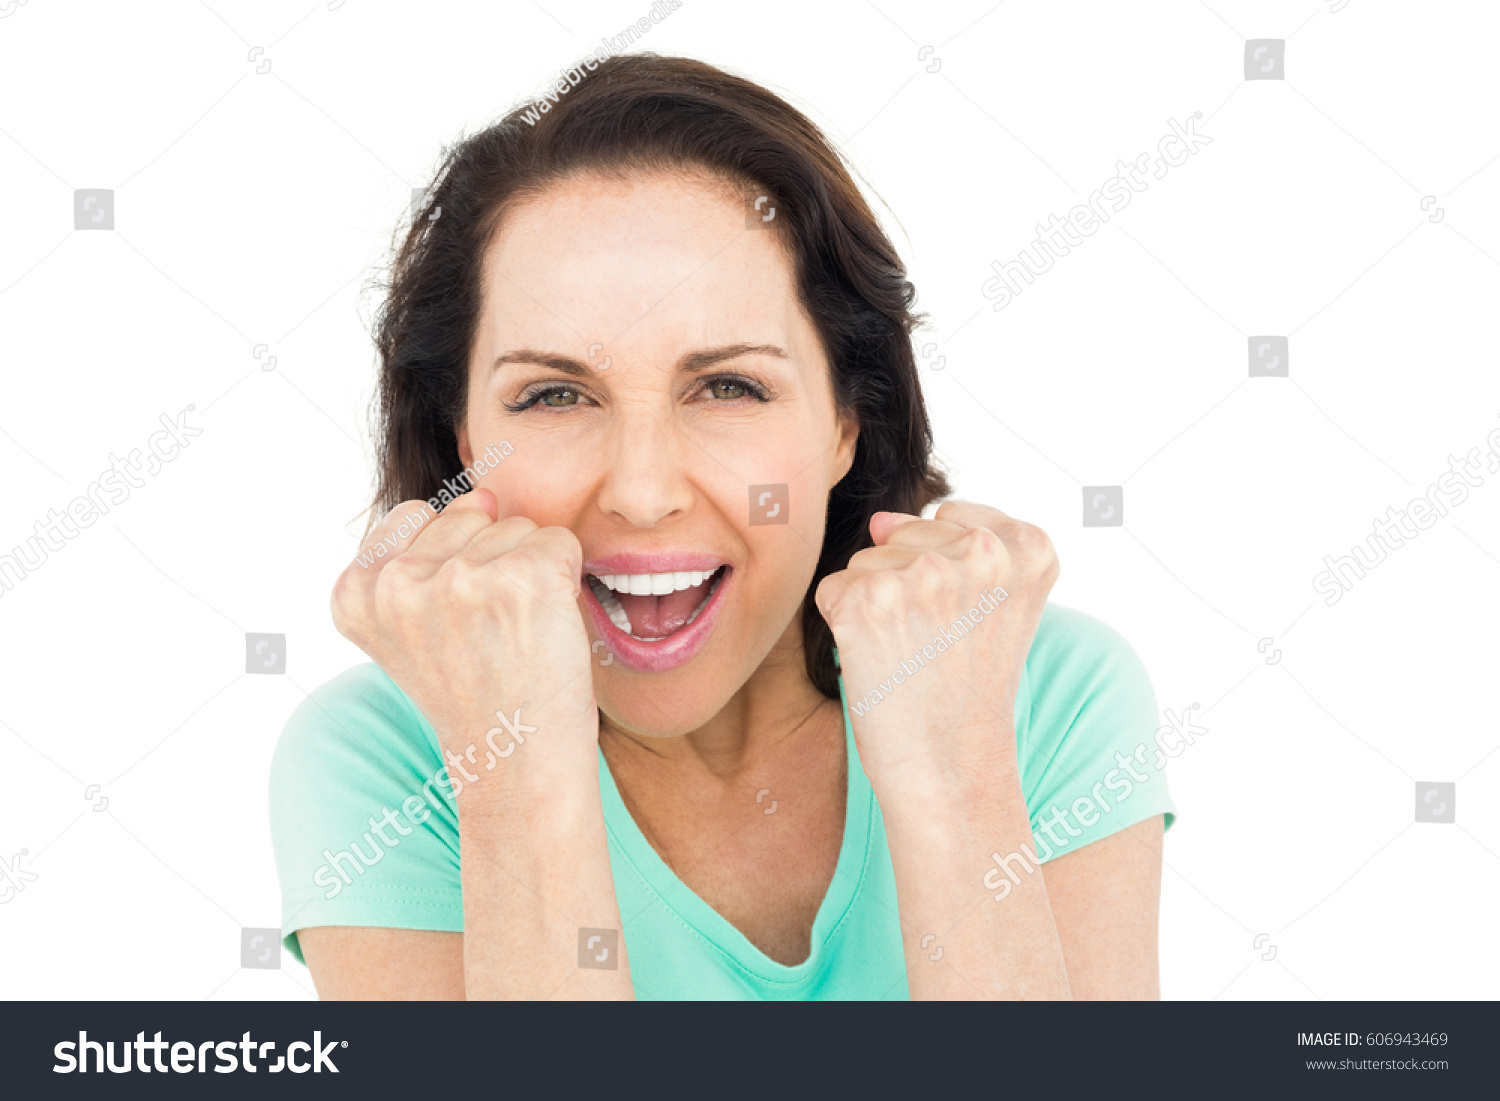 Pretty woman celebrating victory against white background #606943469